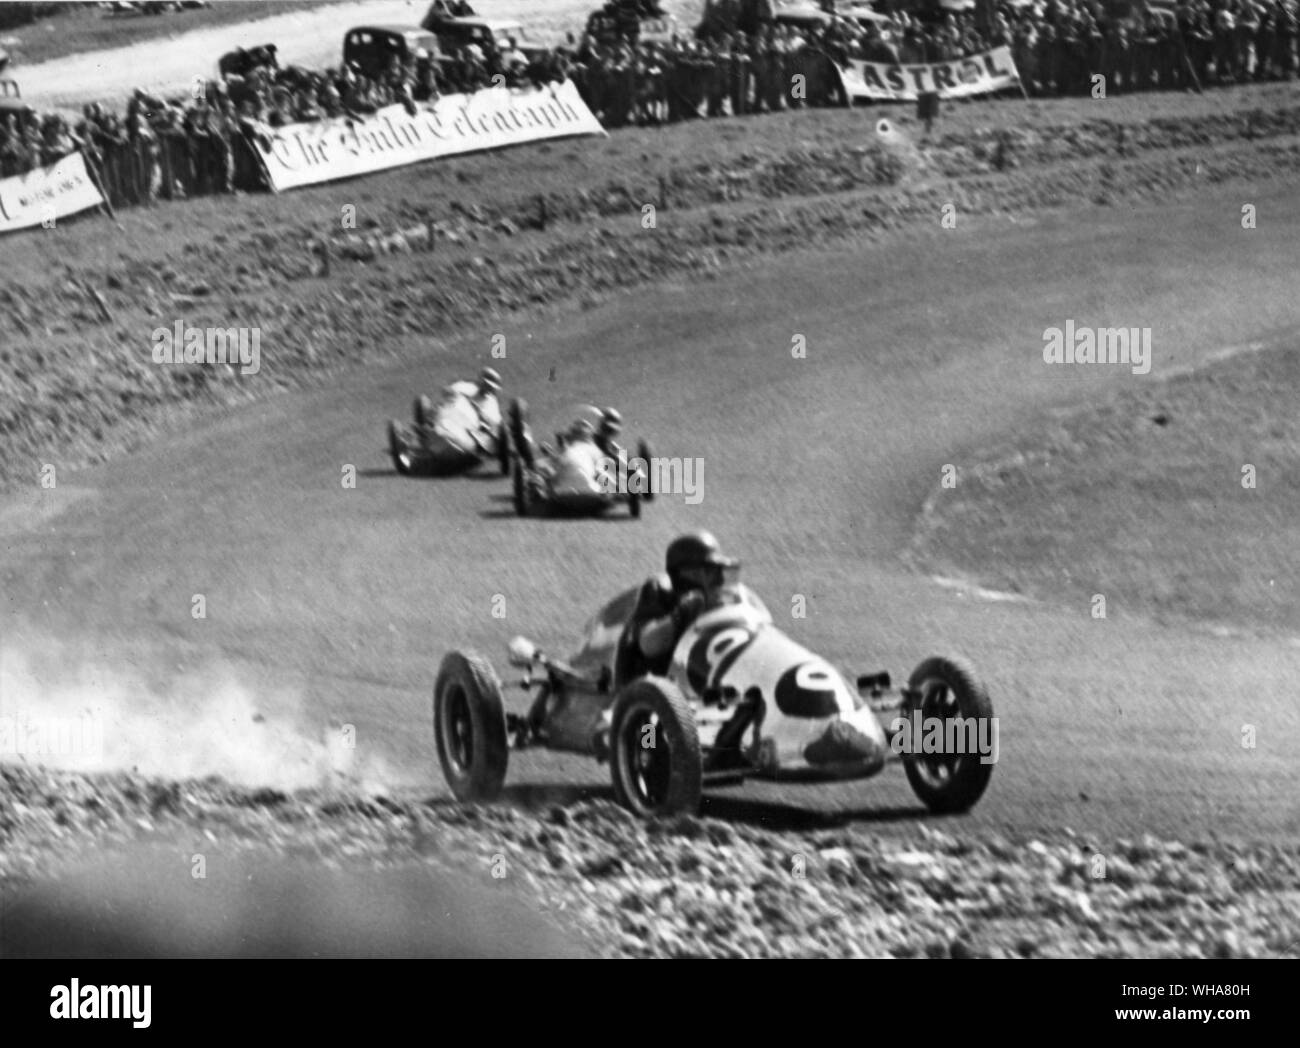 International motor racing at Brands Hatch Headland driving his Cooper 9 skidded and went onto the turf but regained control of the wheel and carried on racing in the open challenge race heat 4 race one.. 13th May 1951 Stock Photo